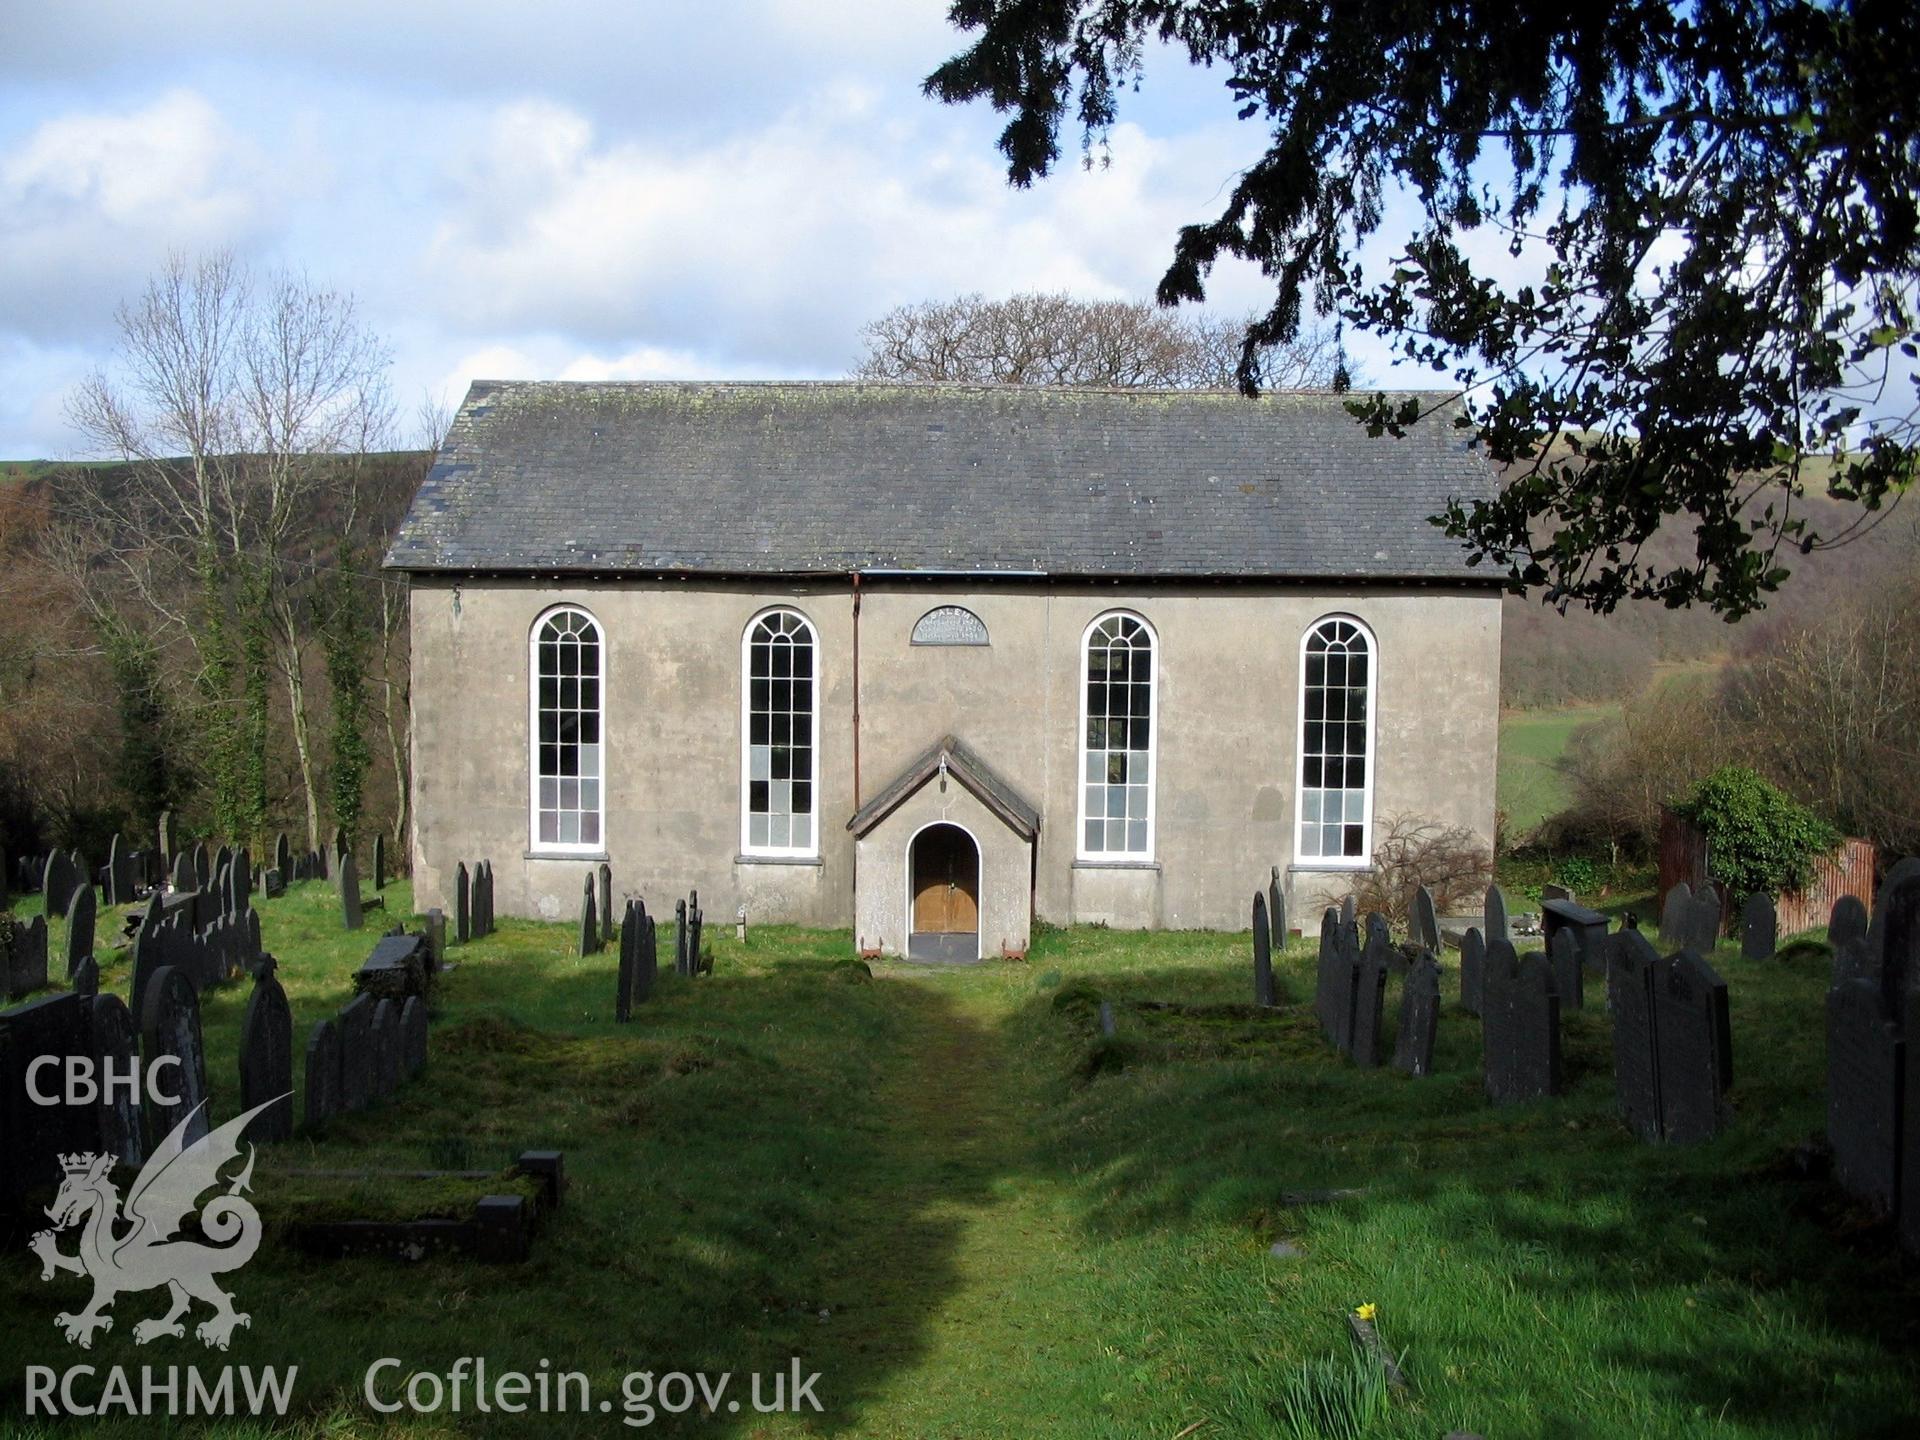 Colour digital photograph showing the front exterior of the Salem Welsh Independent Chapel, Trefeurig.